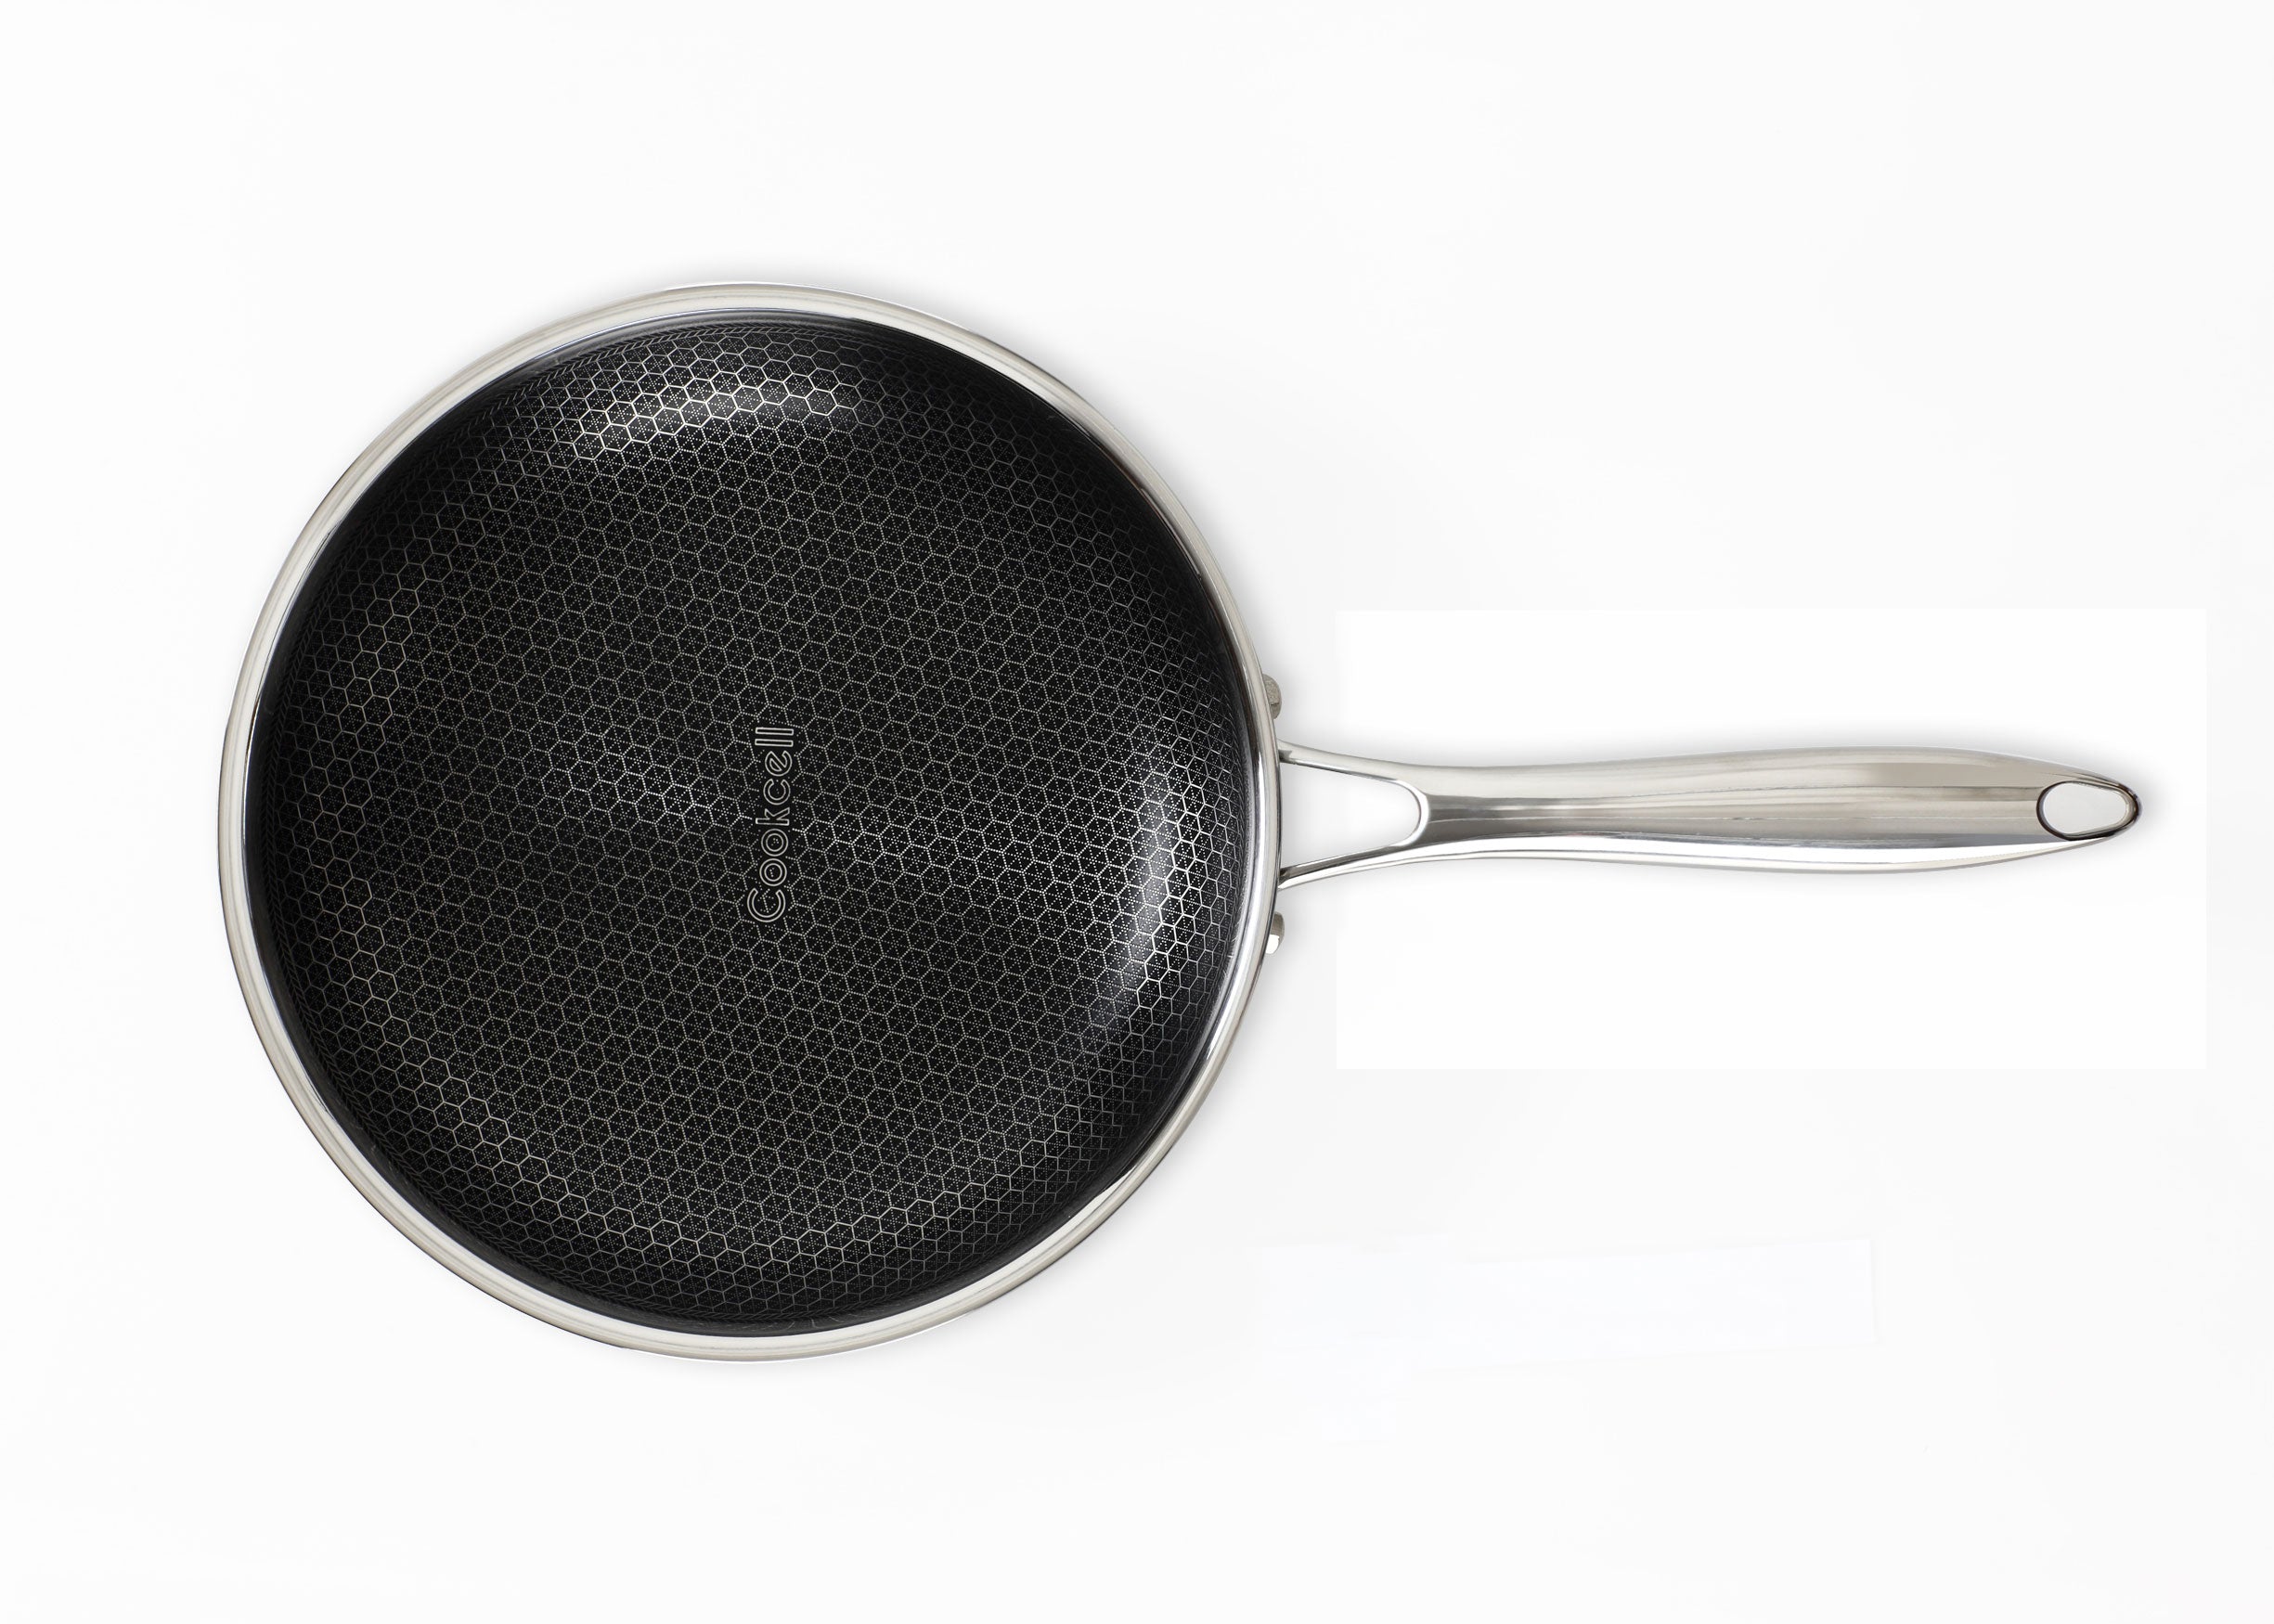 COOKCELL Stainless Steel Non-stick Hybrid Frypan 32cm